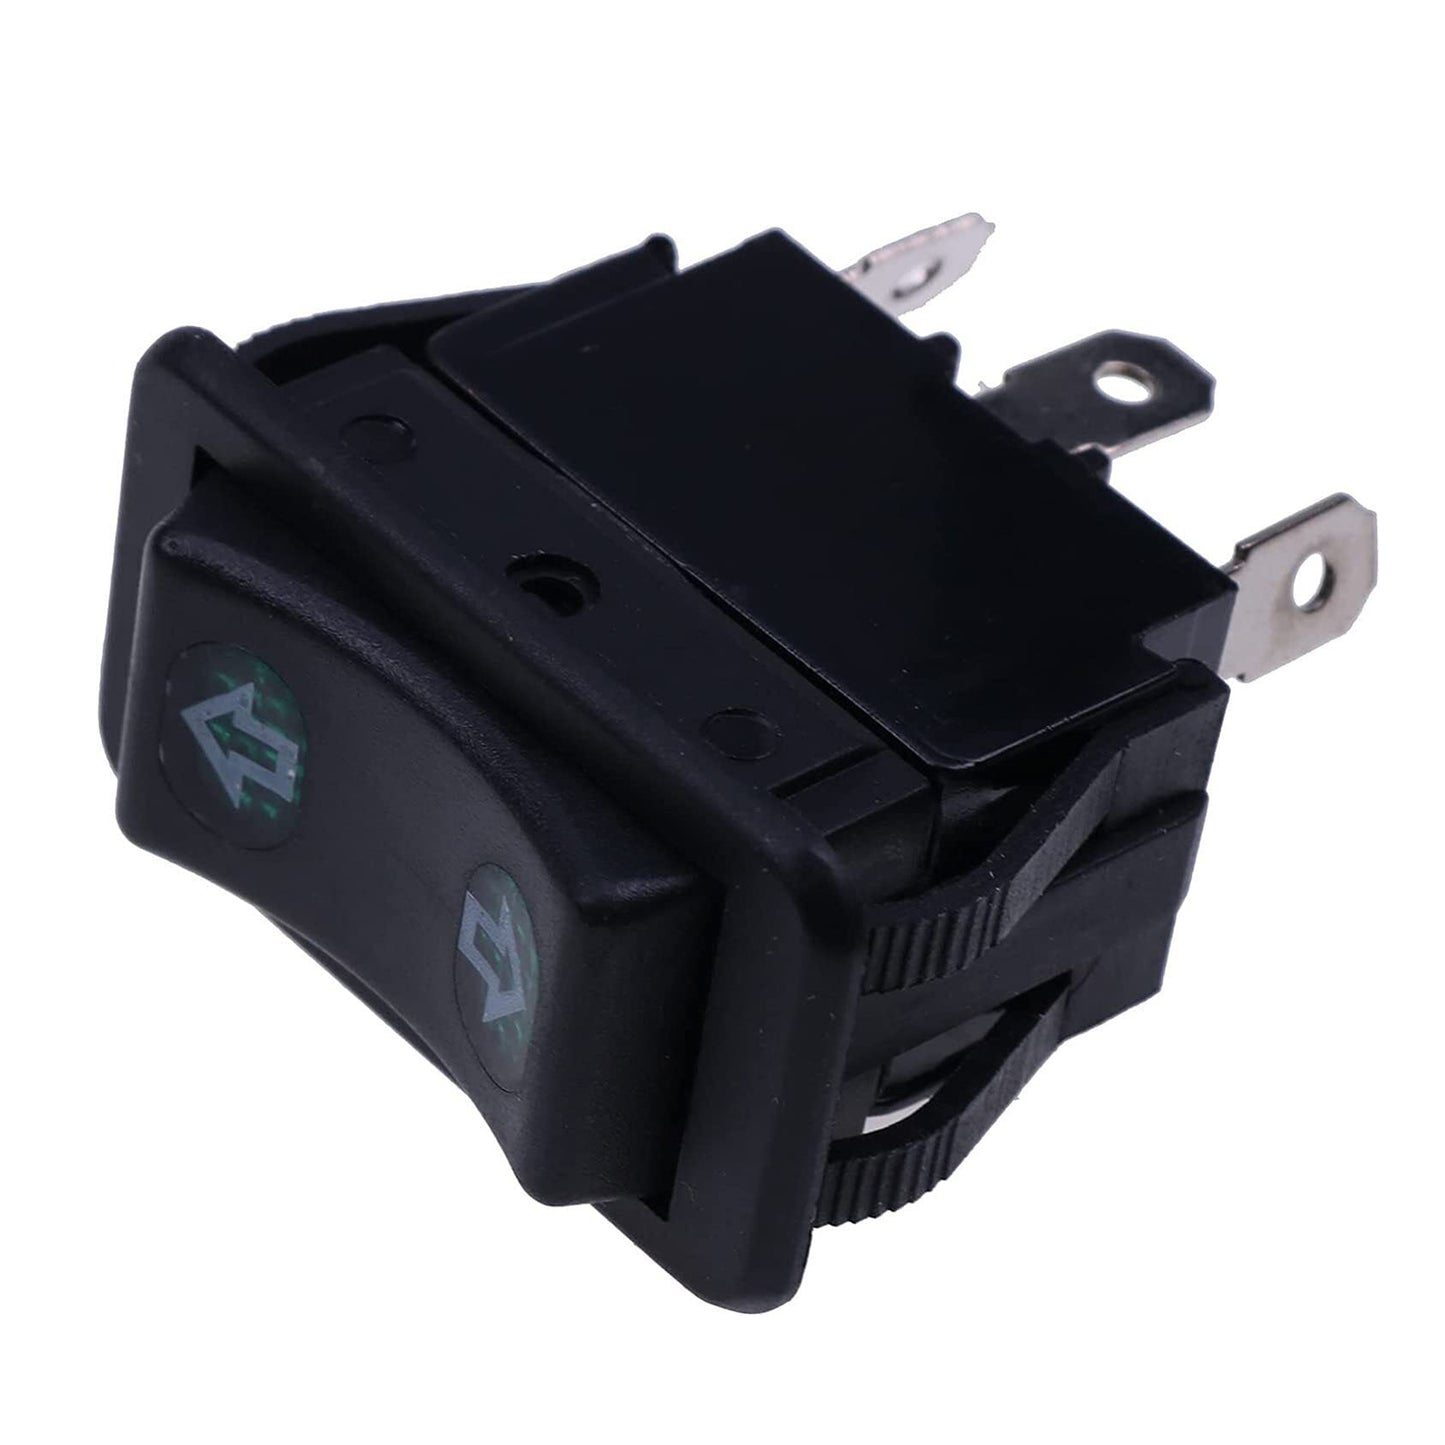 AM116574 Turn Signal Switch Compatible With John Deere 2020 2020A 2030A 4X2 4X4 625i